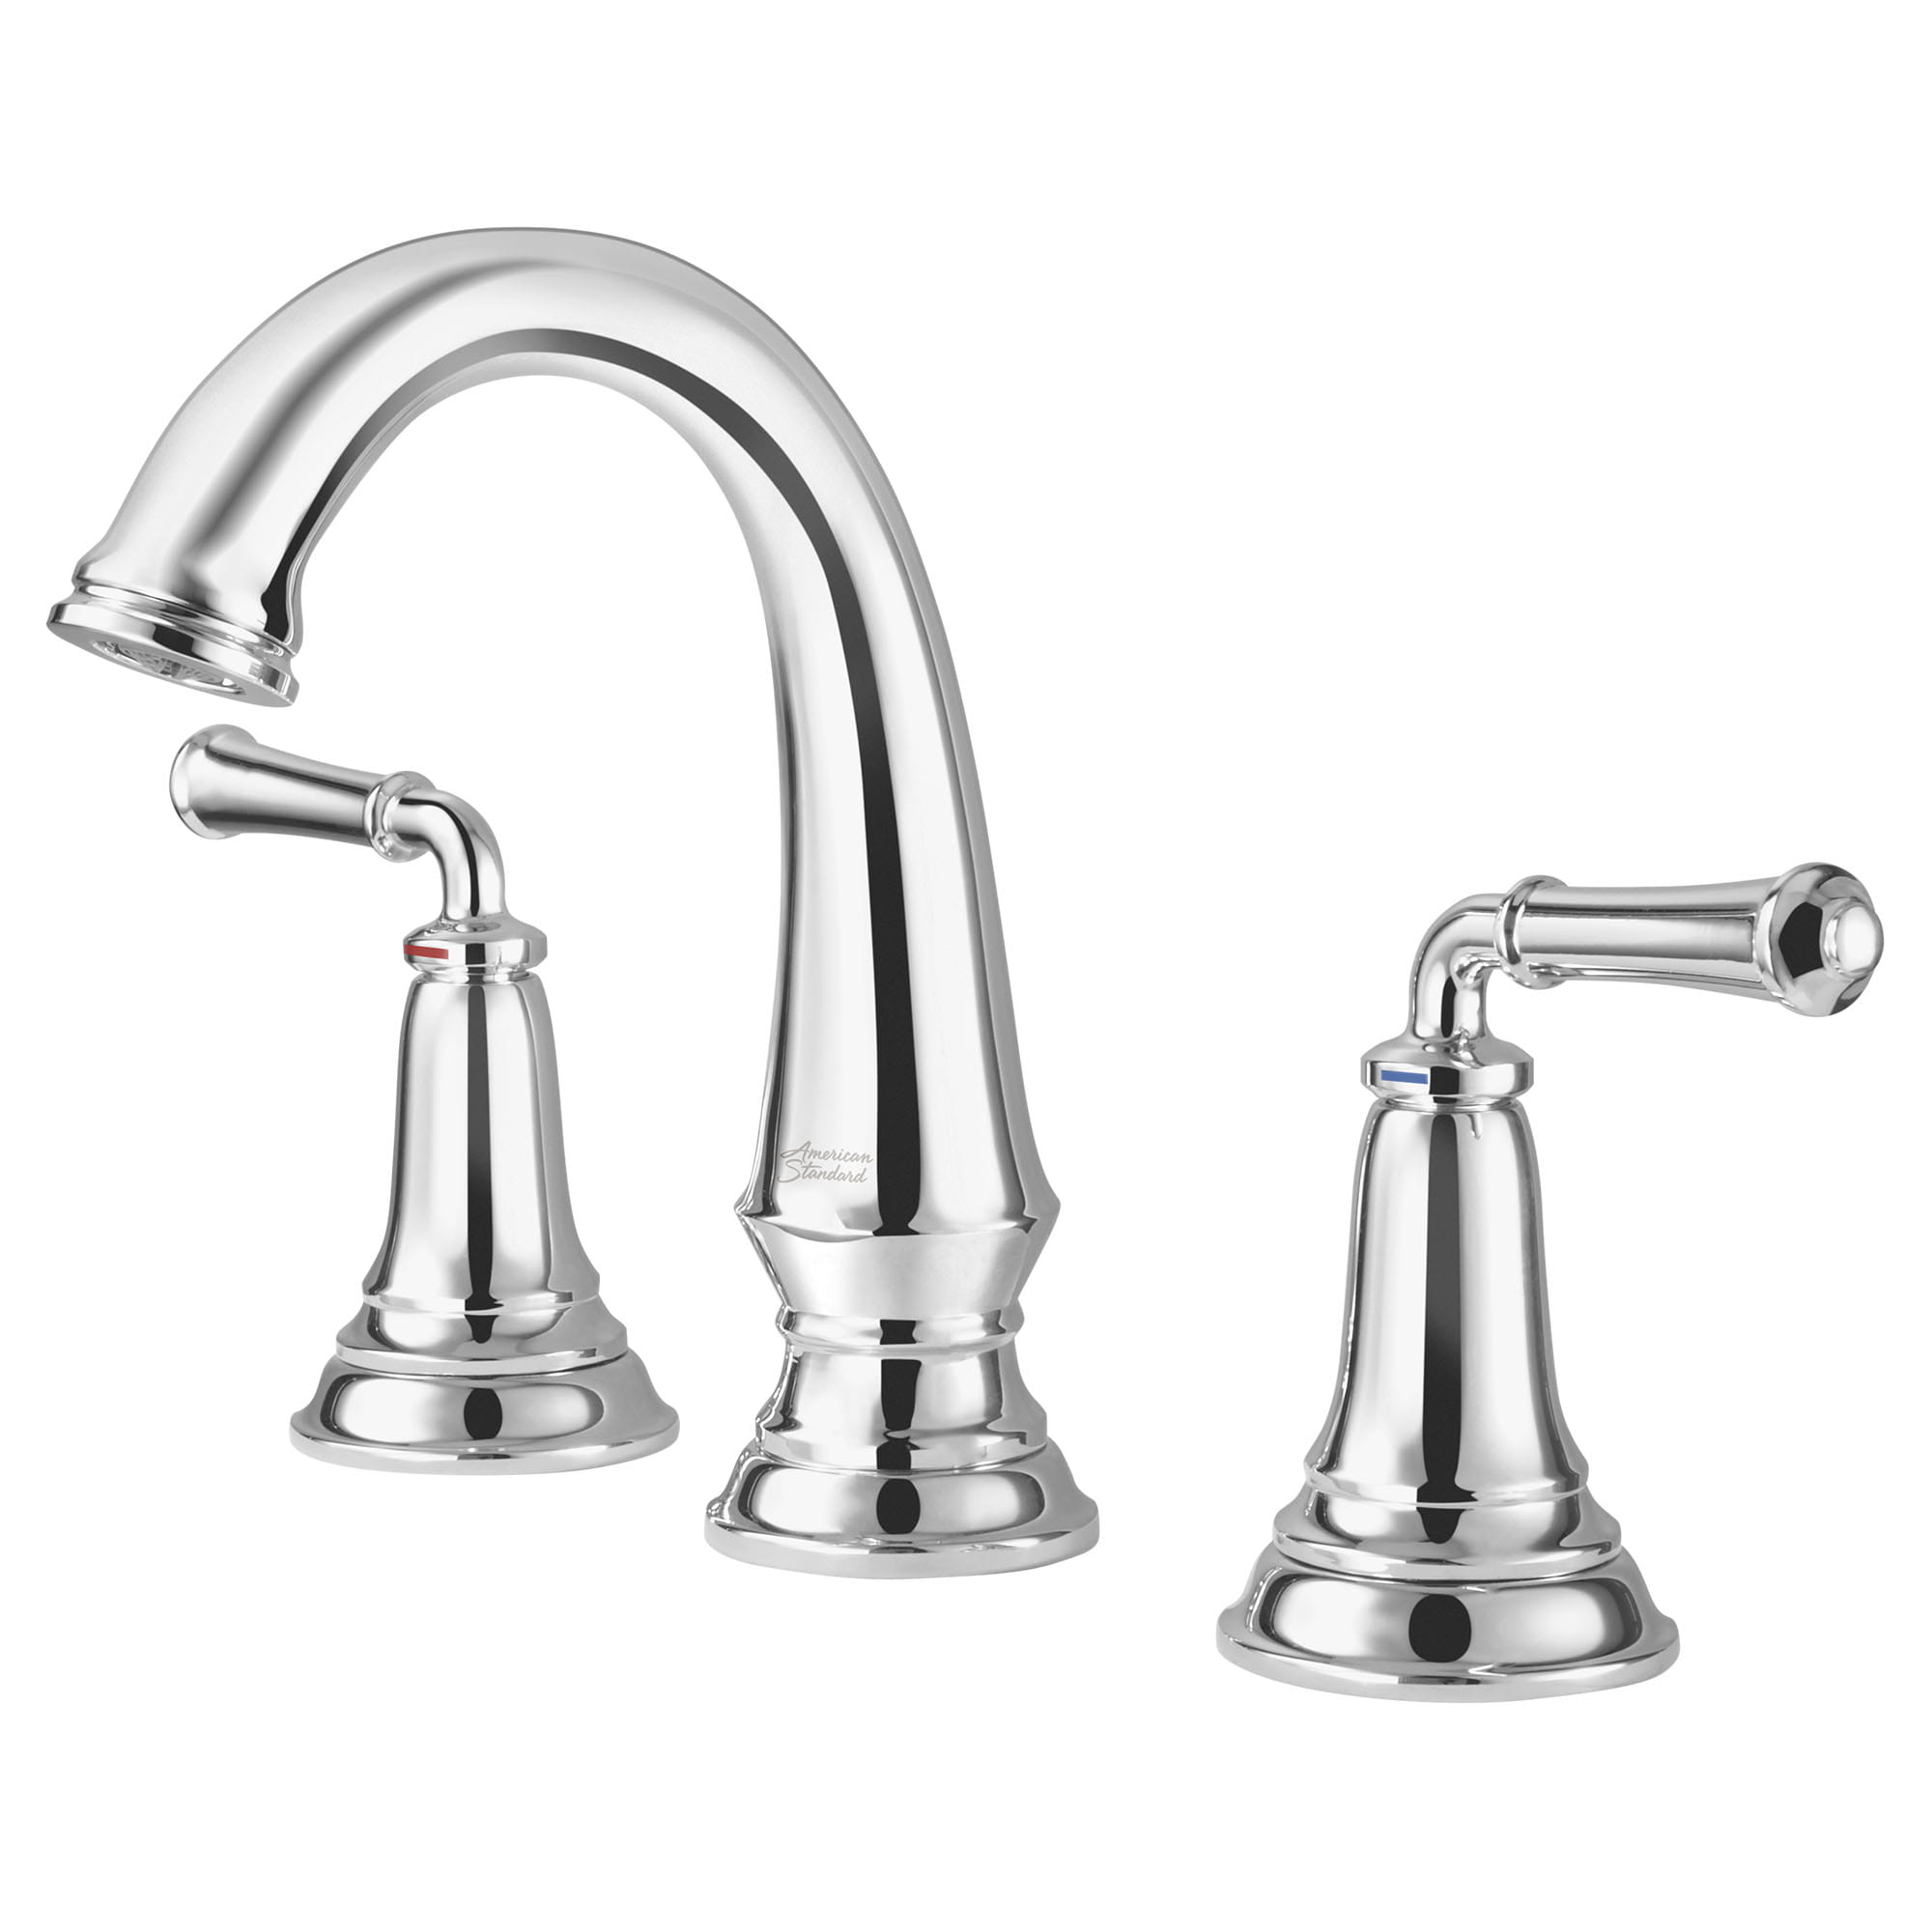 Delancey 8 Inch Widespread 2 Handle Bathroom Faucet 12 gpm 45 L min With Lever Handles CHROME